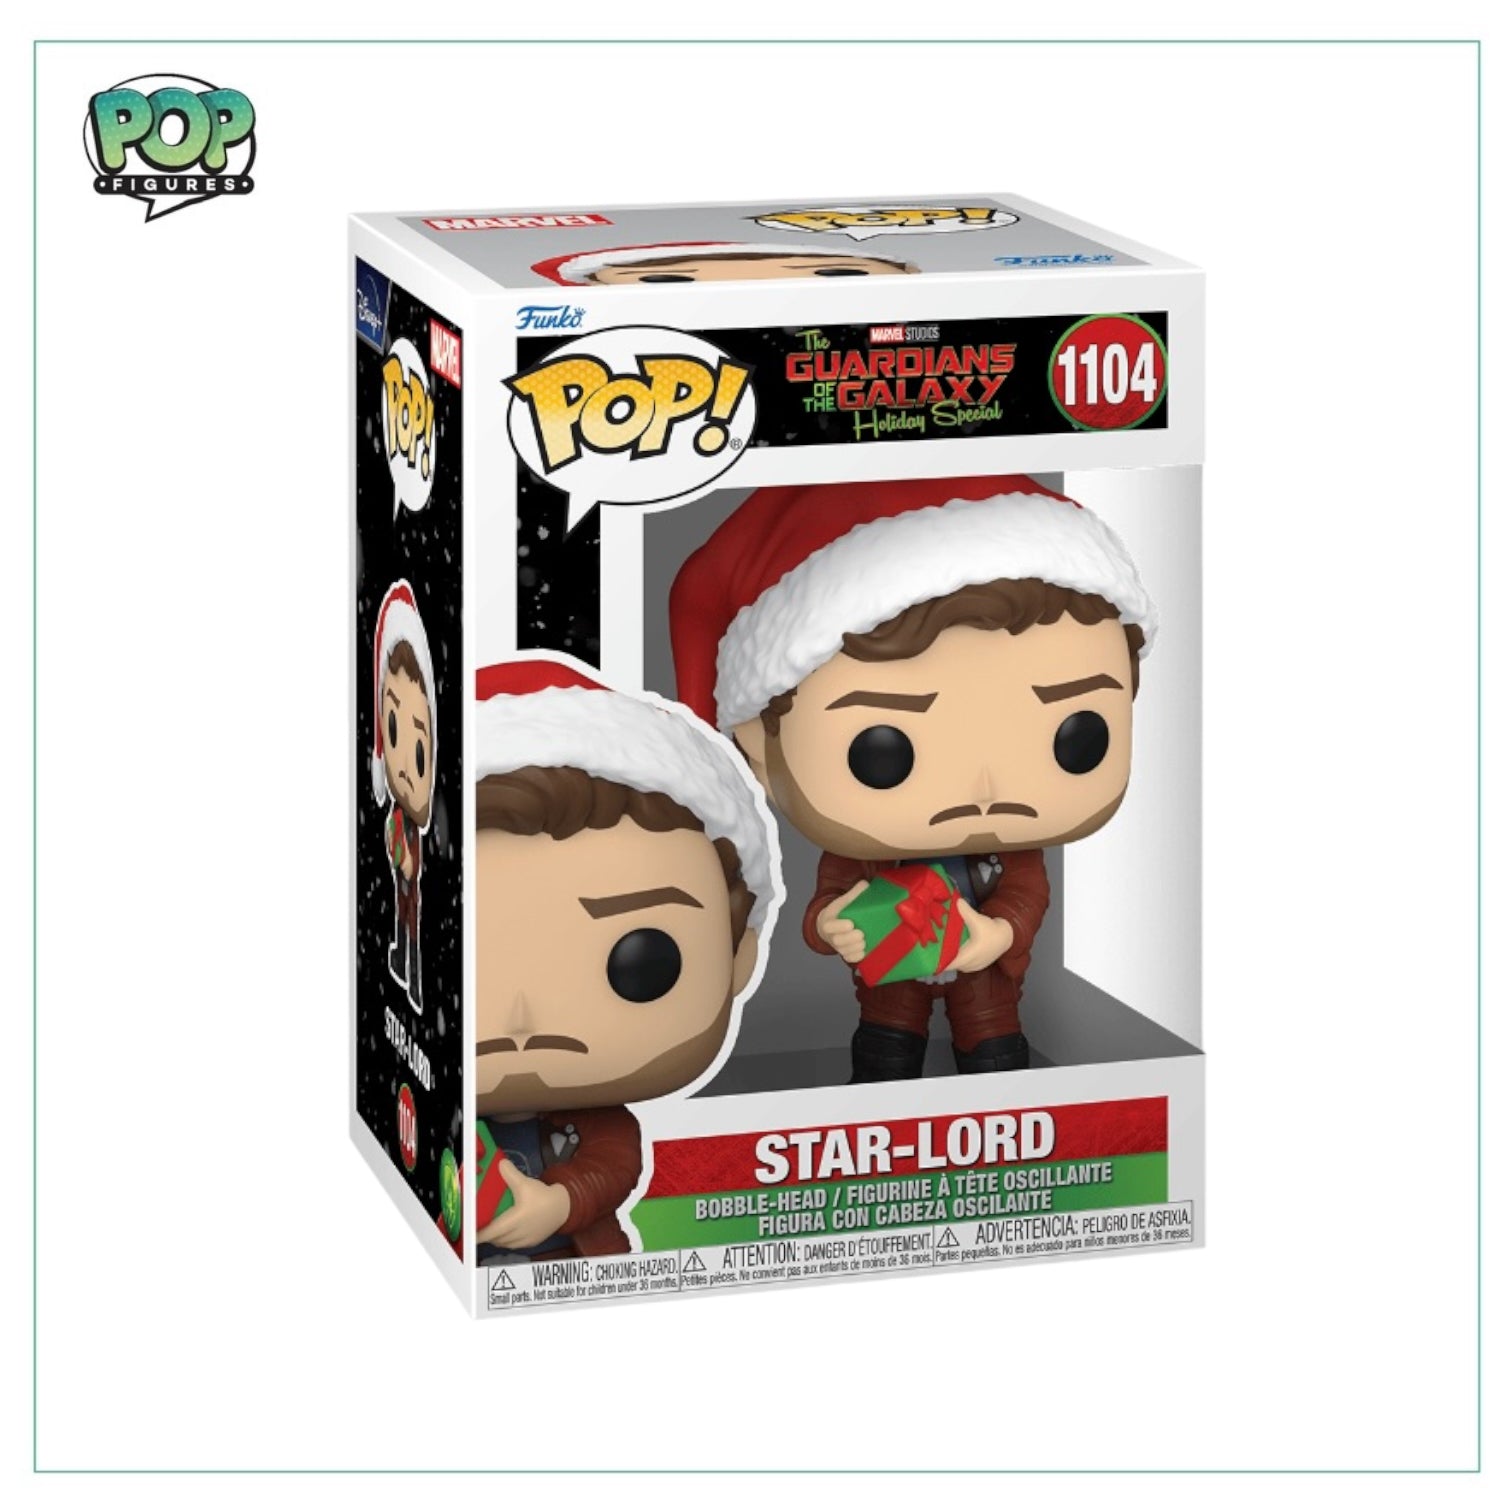 Star-Lord #1104 Funko Pop! - Guardians of the Galaxy Holiday Special